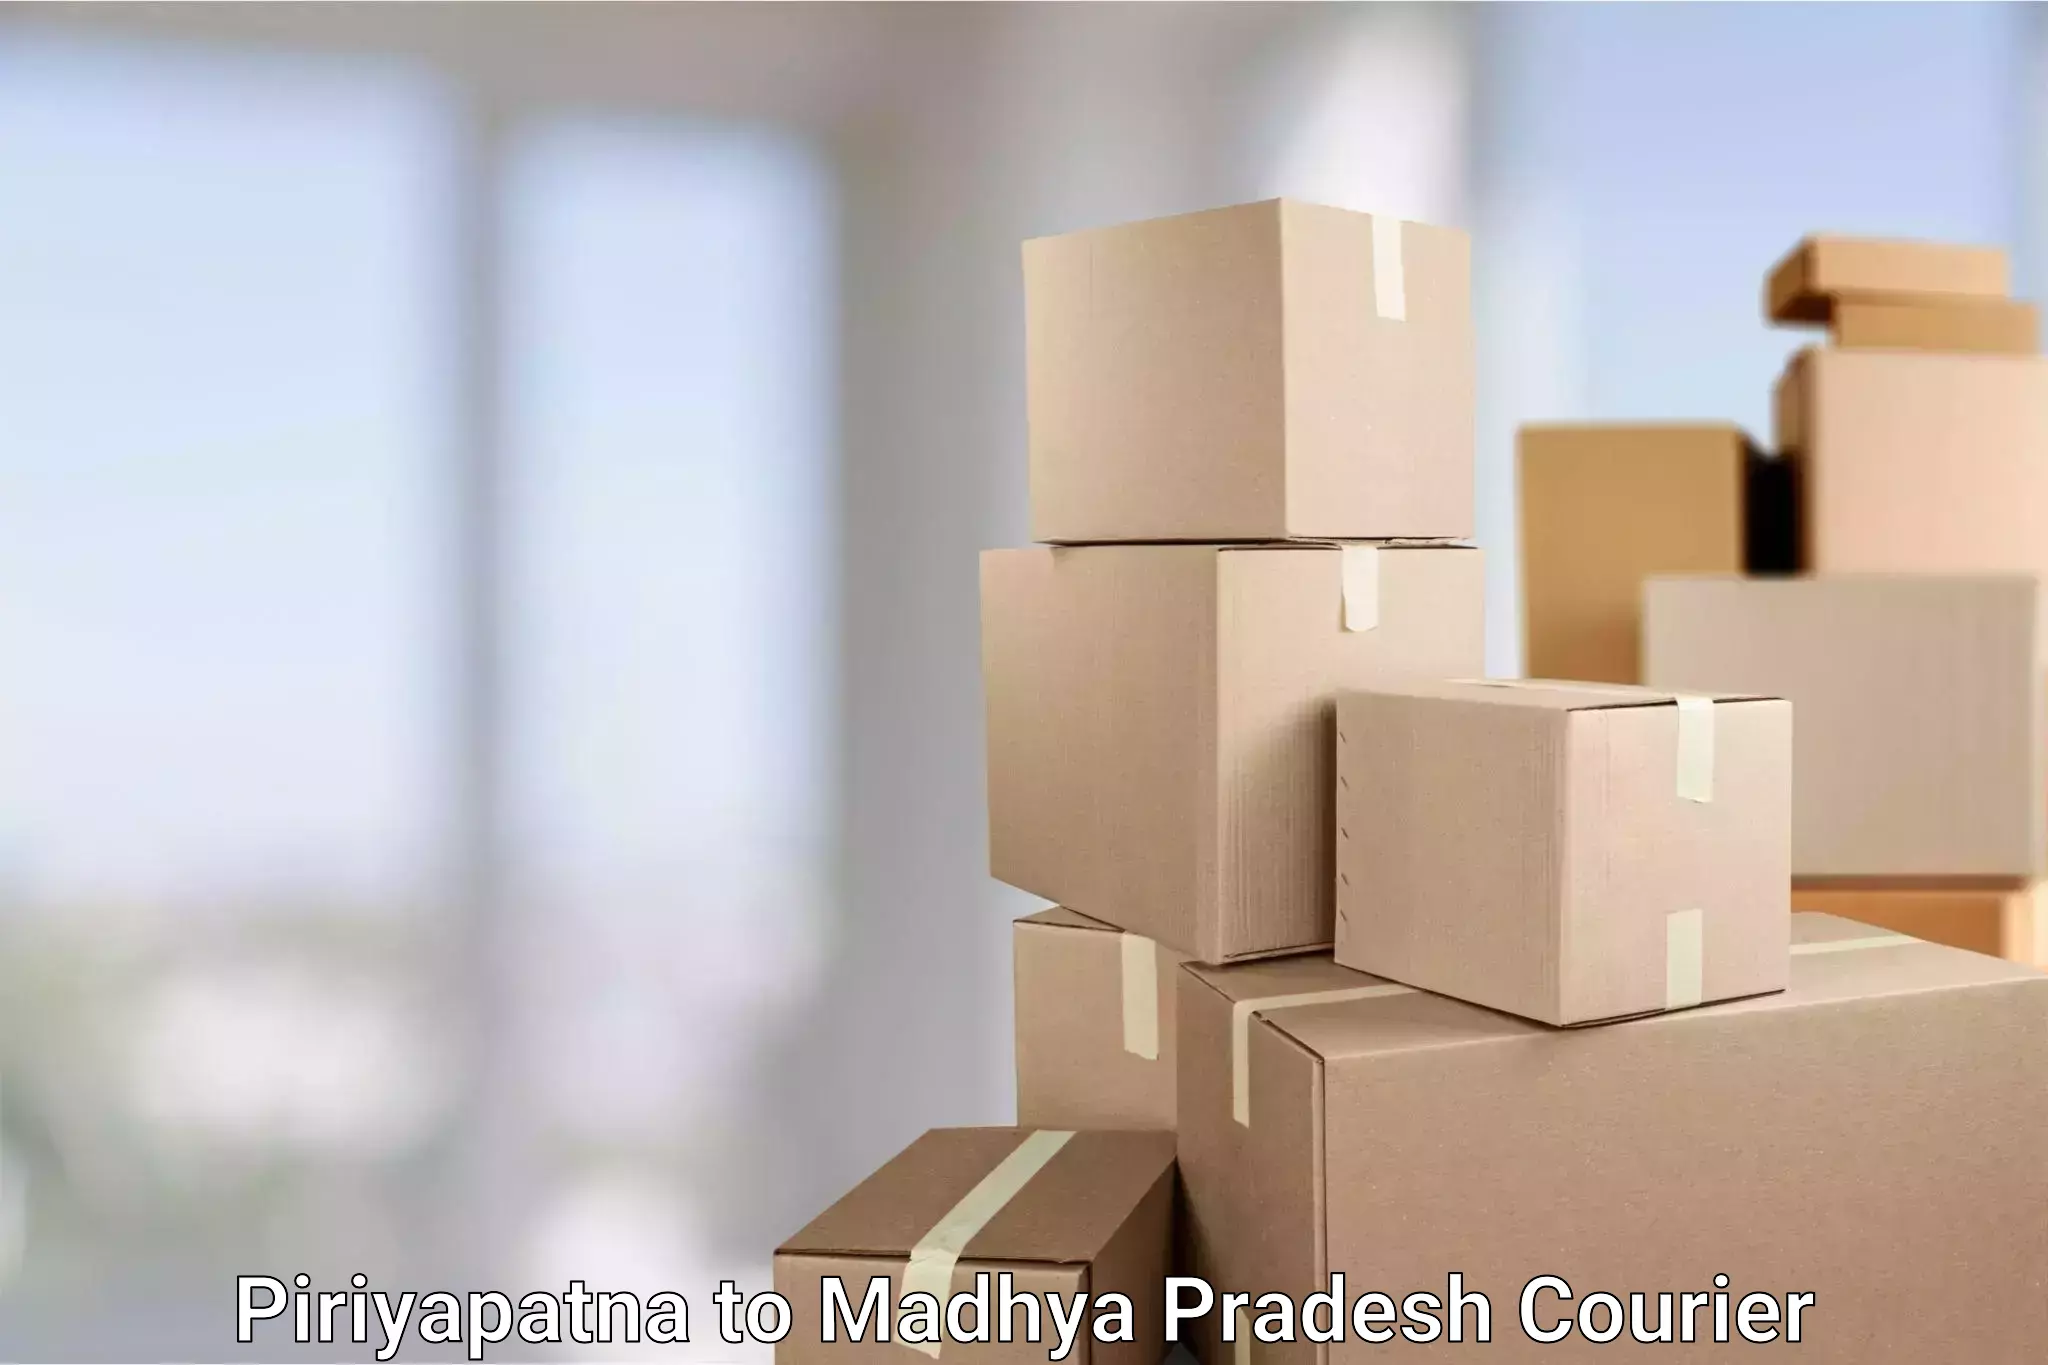 Large package courier Piriyapatna to Bhopal